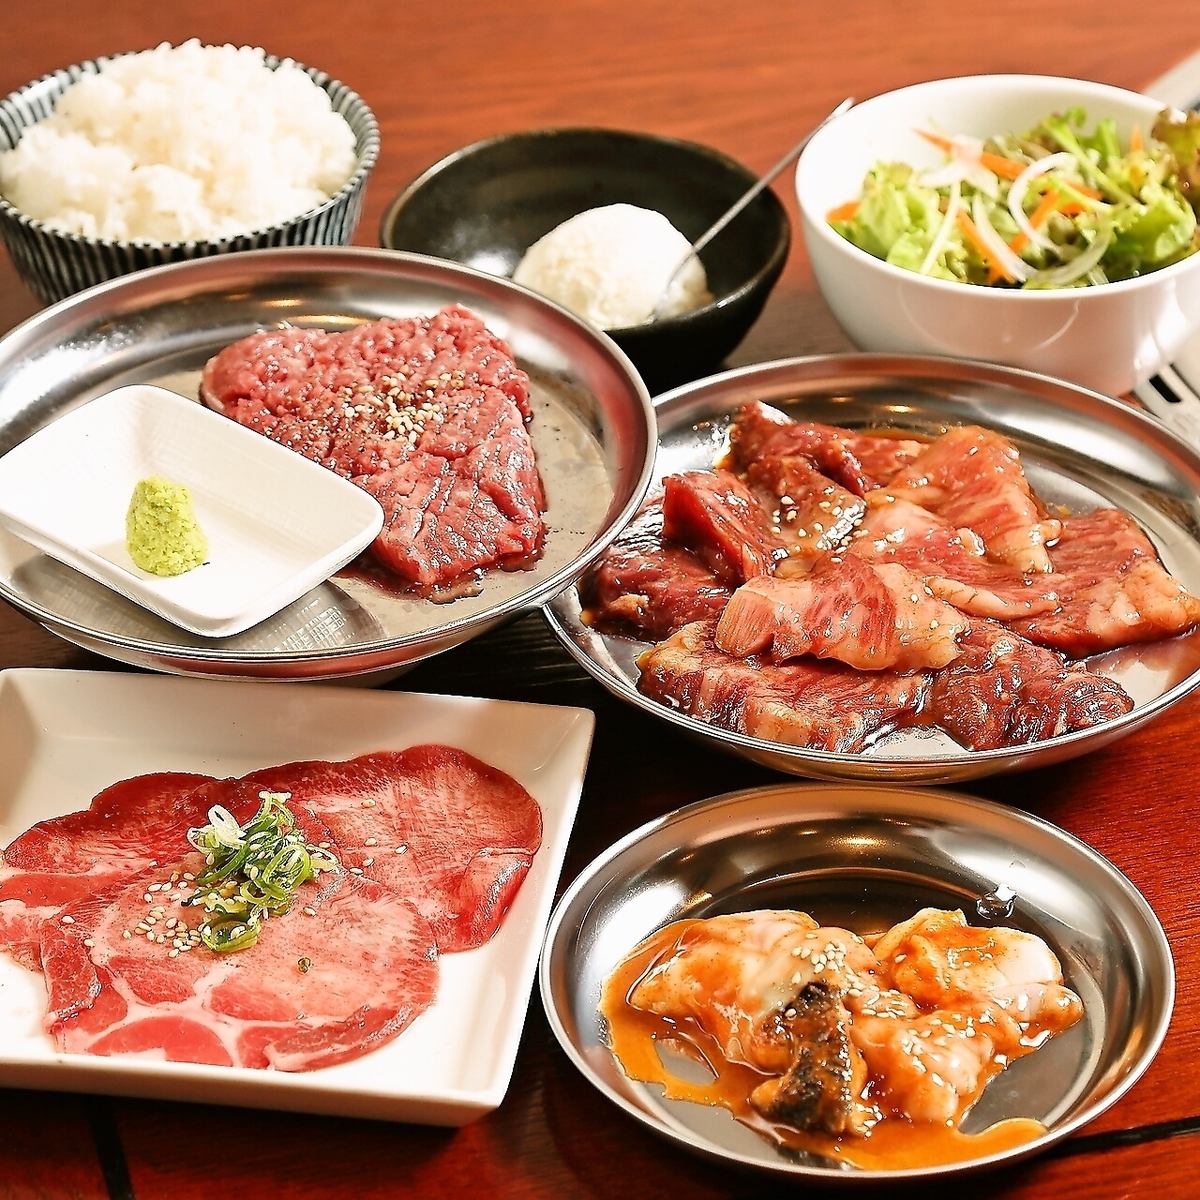 A relaxing place for local residents, 5 minutes walk from Minatogawa Koen Station.A yakiniku restaurant with delicious fresh Japanese beef and seasonal local sake!